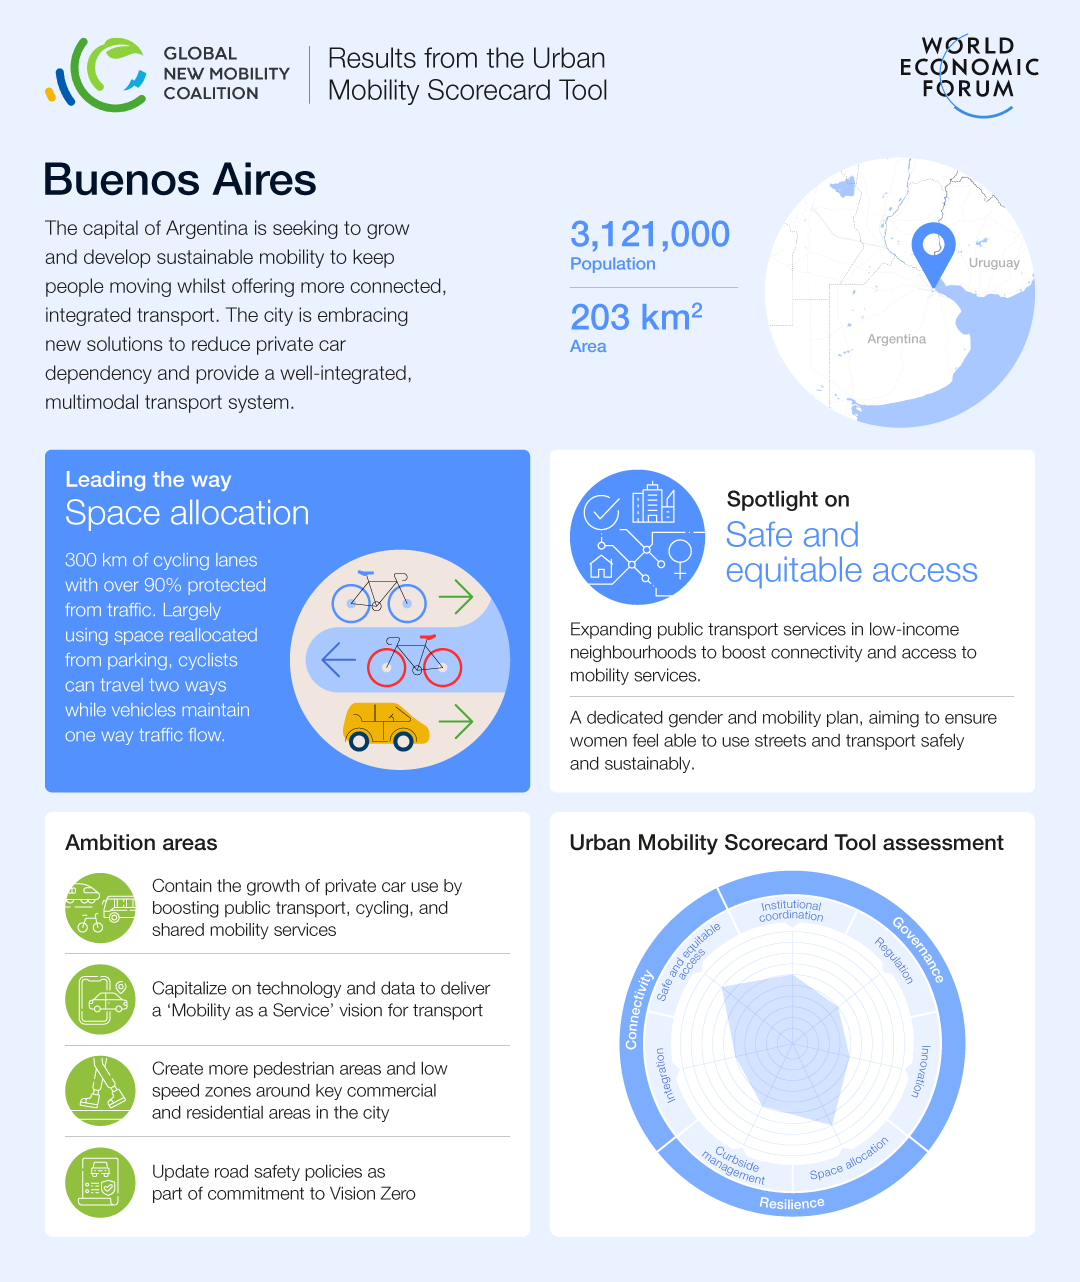 Results from the Urban Mobility Scorecard Tool for Buenos Aires.